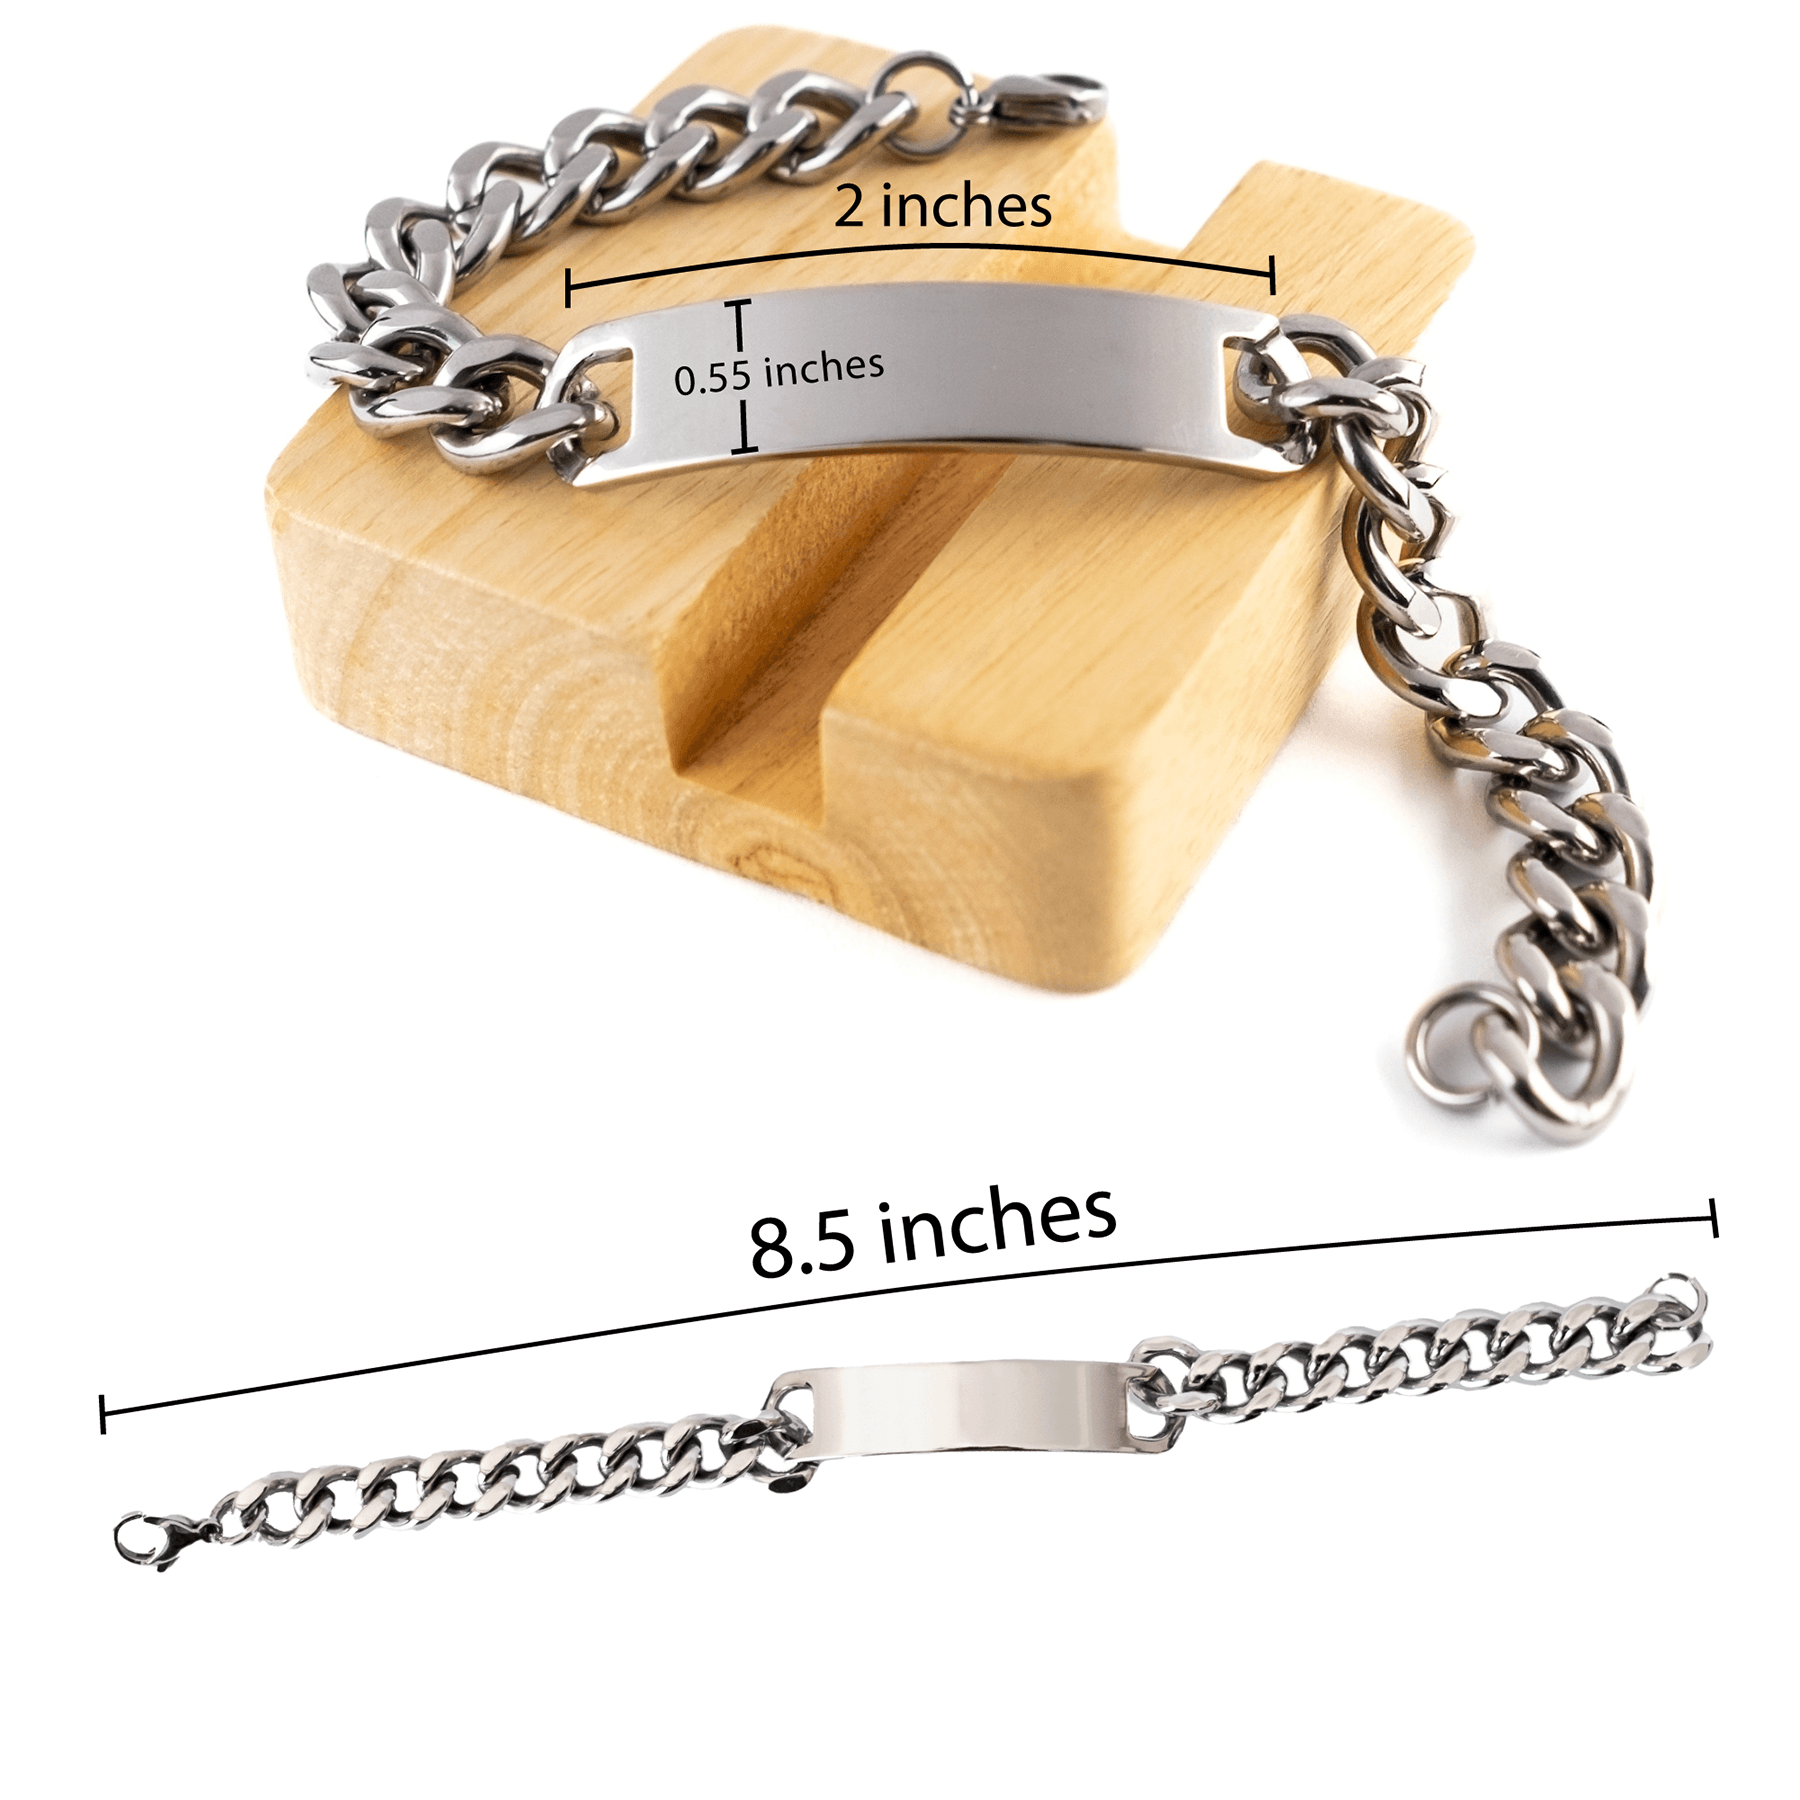 Remarkable Childcare Worker Gifts, Your dedication and hard work, Inspirational Birthday Christmas Unique Cuban Chain Stainless Steel Bracelet For Childcare Worker, Coworkers, Men, Women, Friends - Mallard Moon Gift Shop